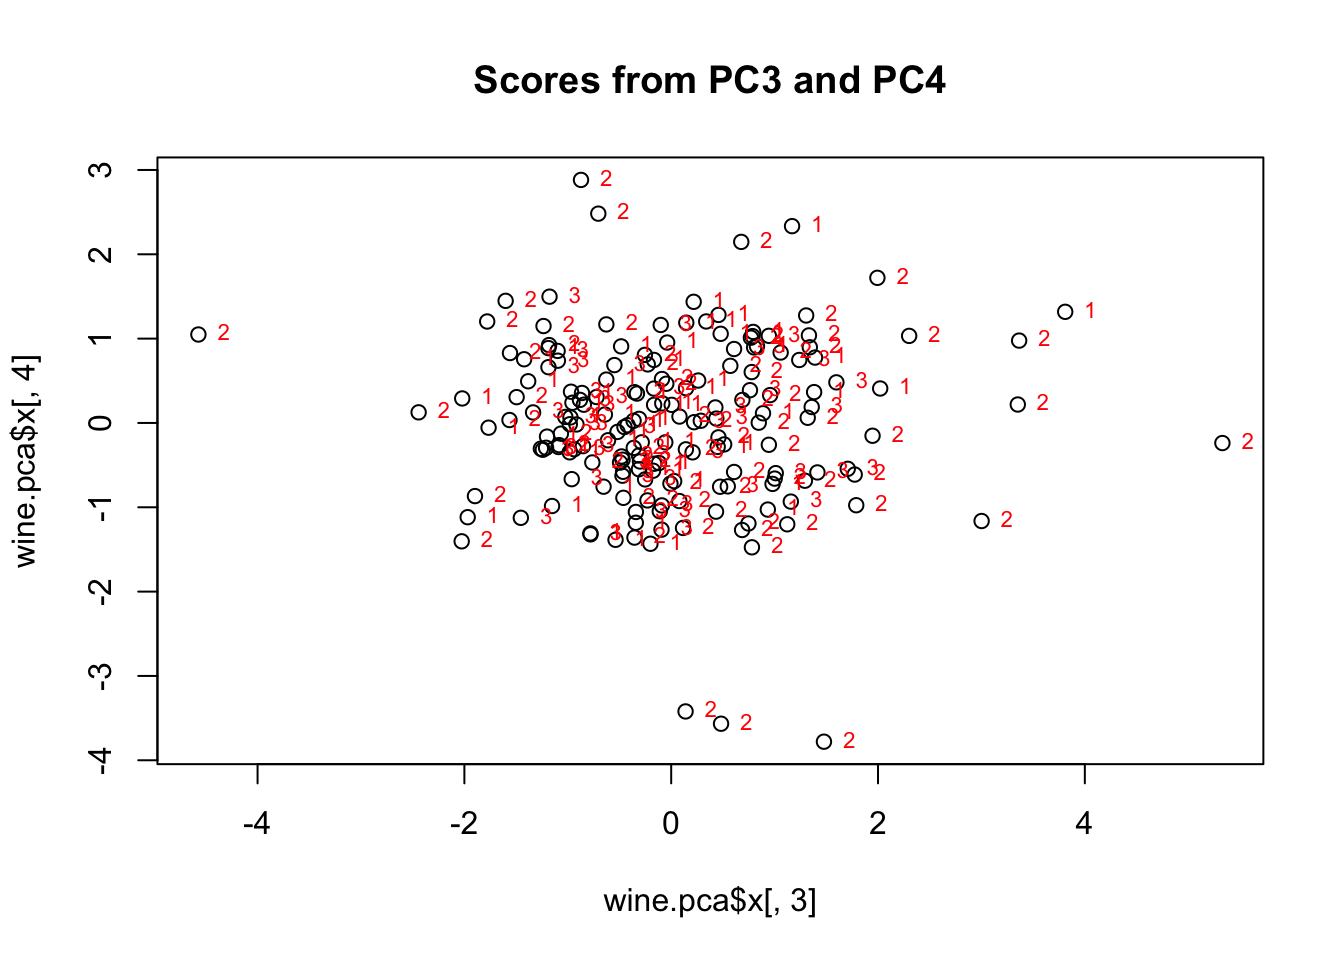 Scatterplot of principal component scores for three wine cultivars (1, 2, 3). The third principal component scores are on the x axis, and the fourth principal component scores are on the y axis. All three cultivars primarily group in the center, with some outliers, mostly from cultivar 2.